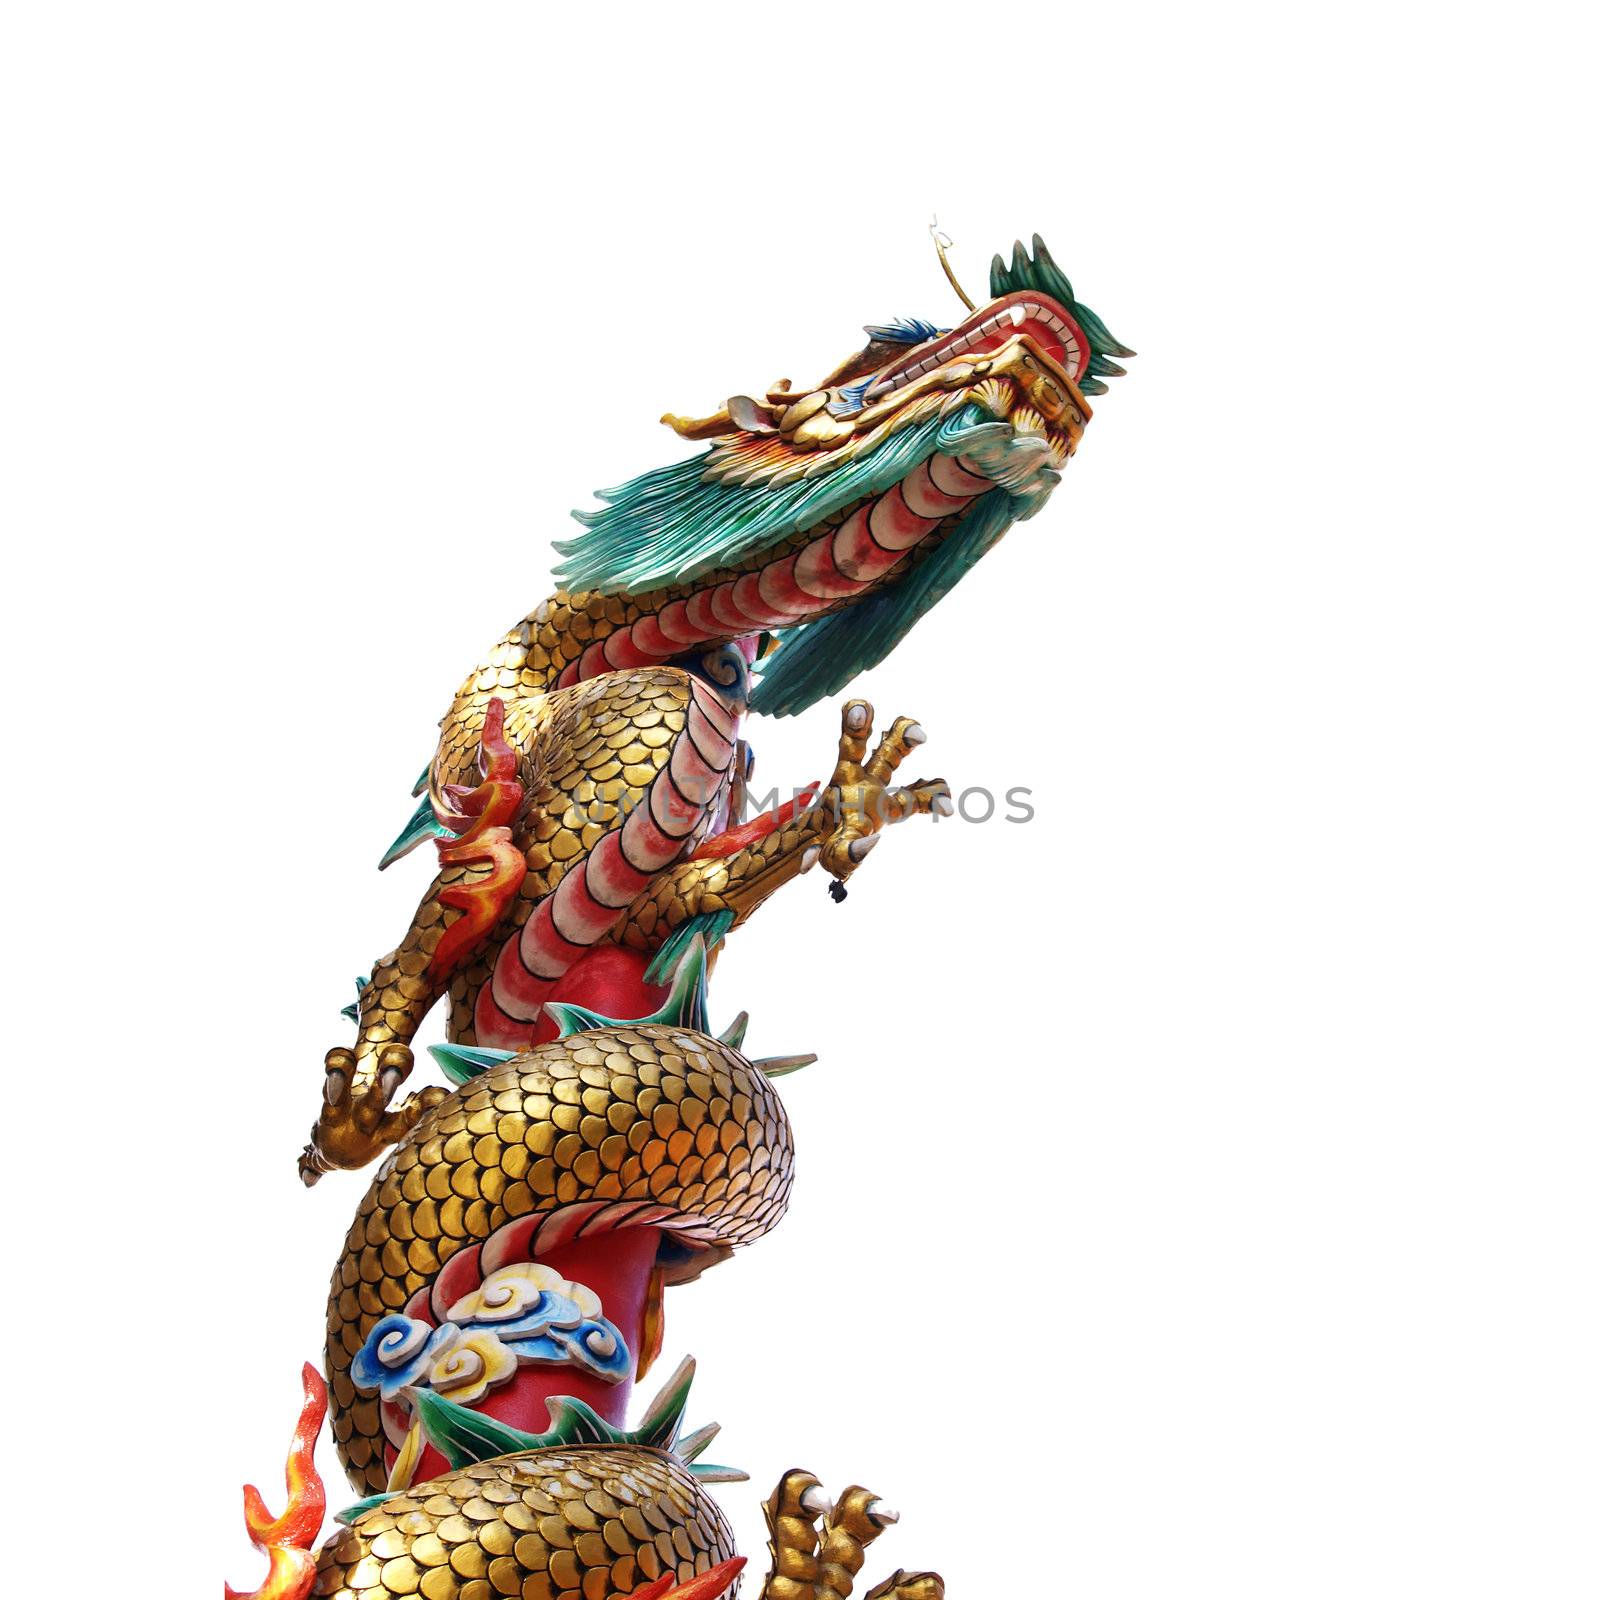  Chinese style dragon statue isolate on white background (from t by jakgree